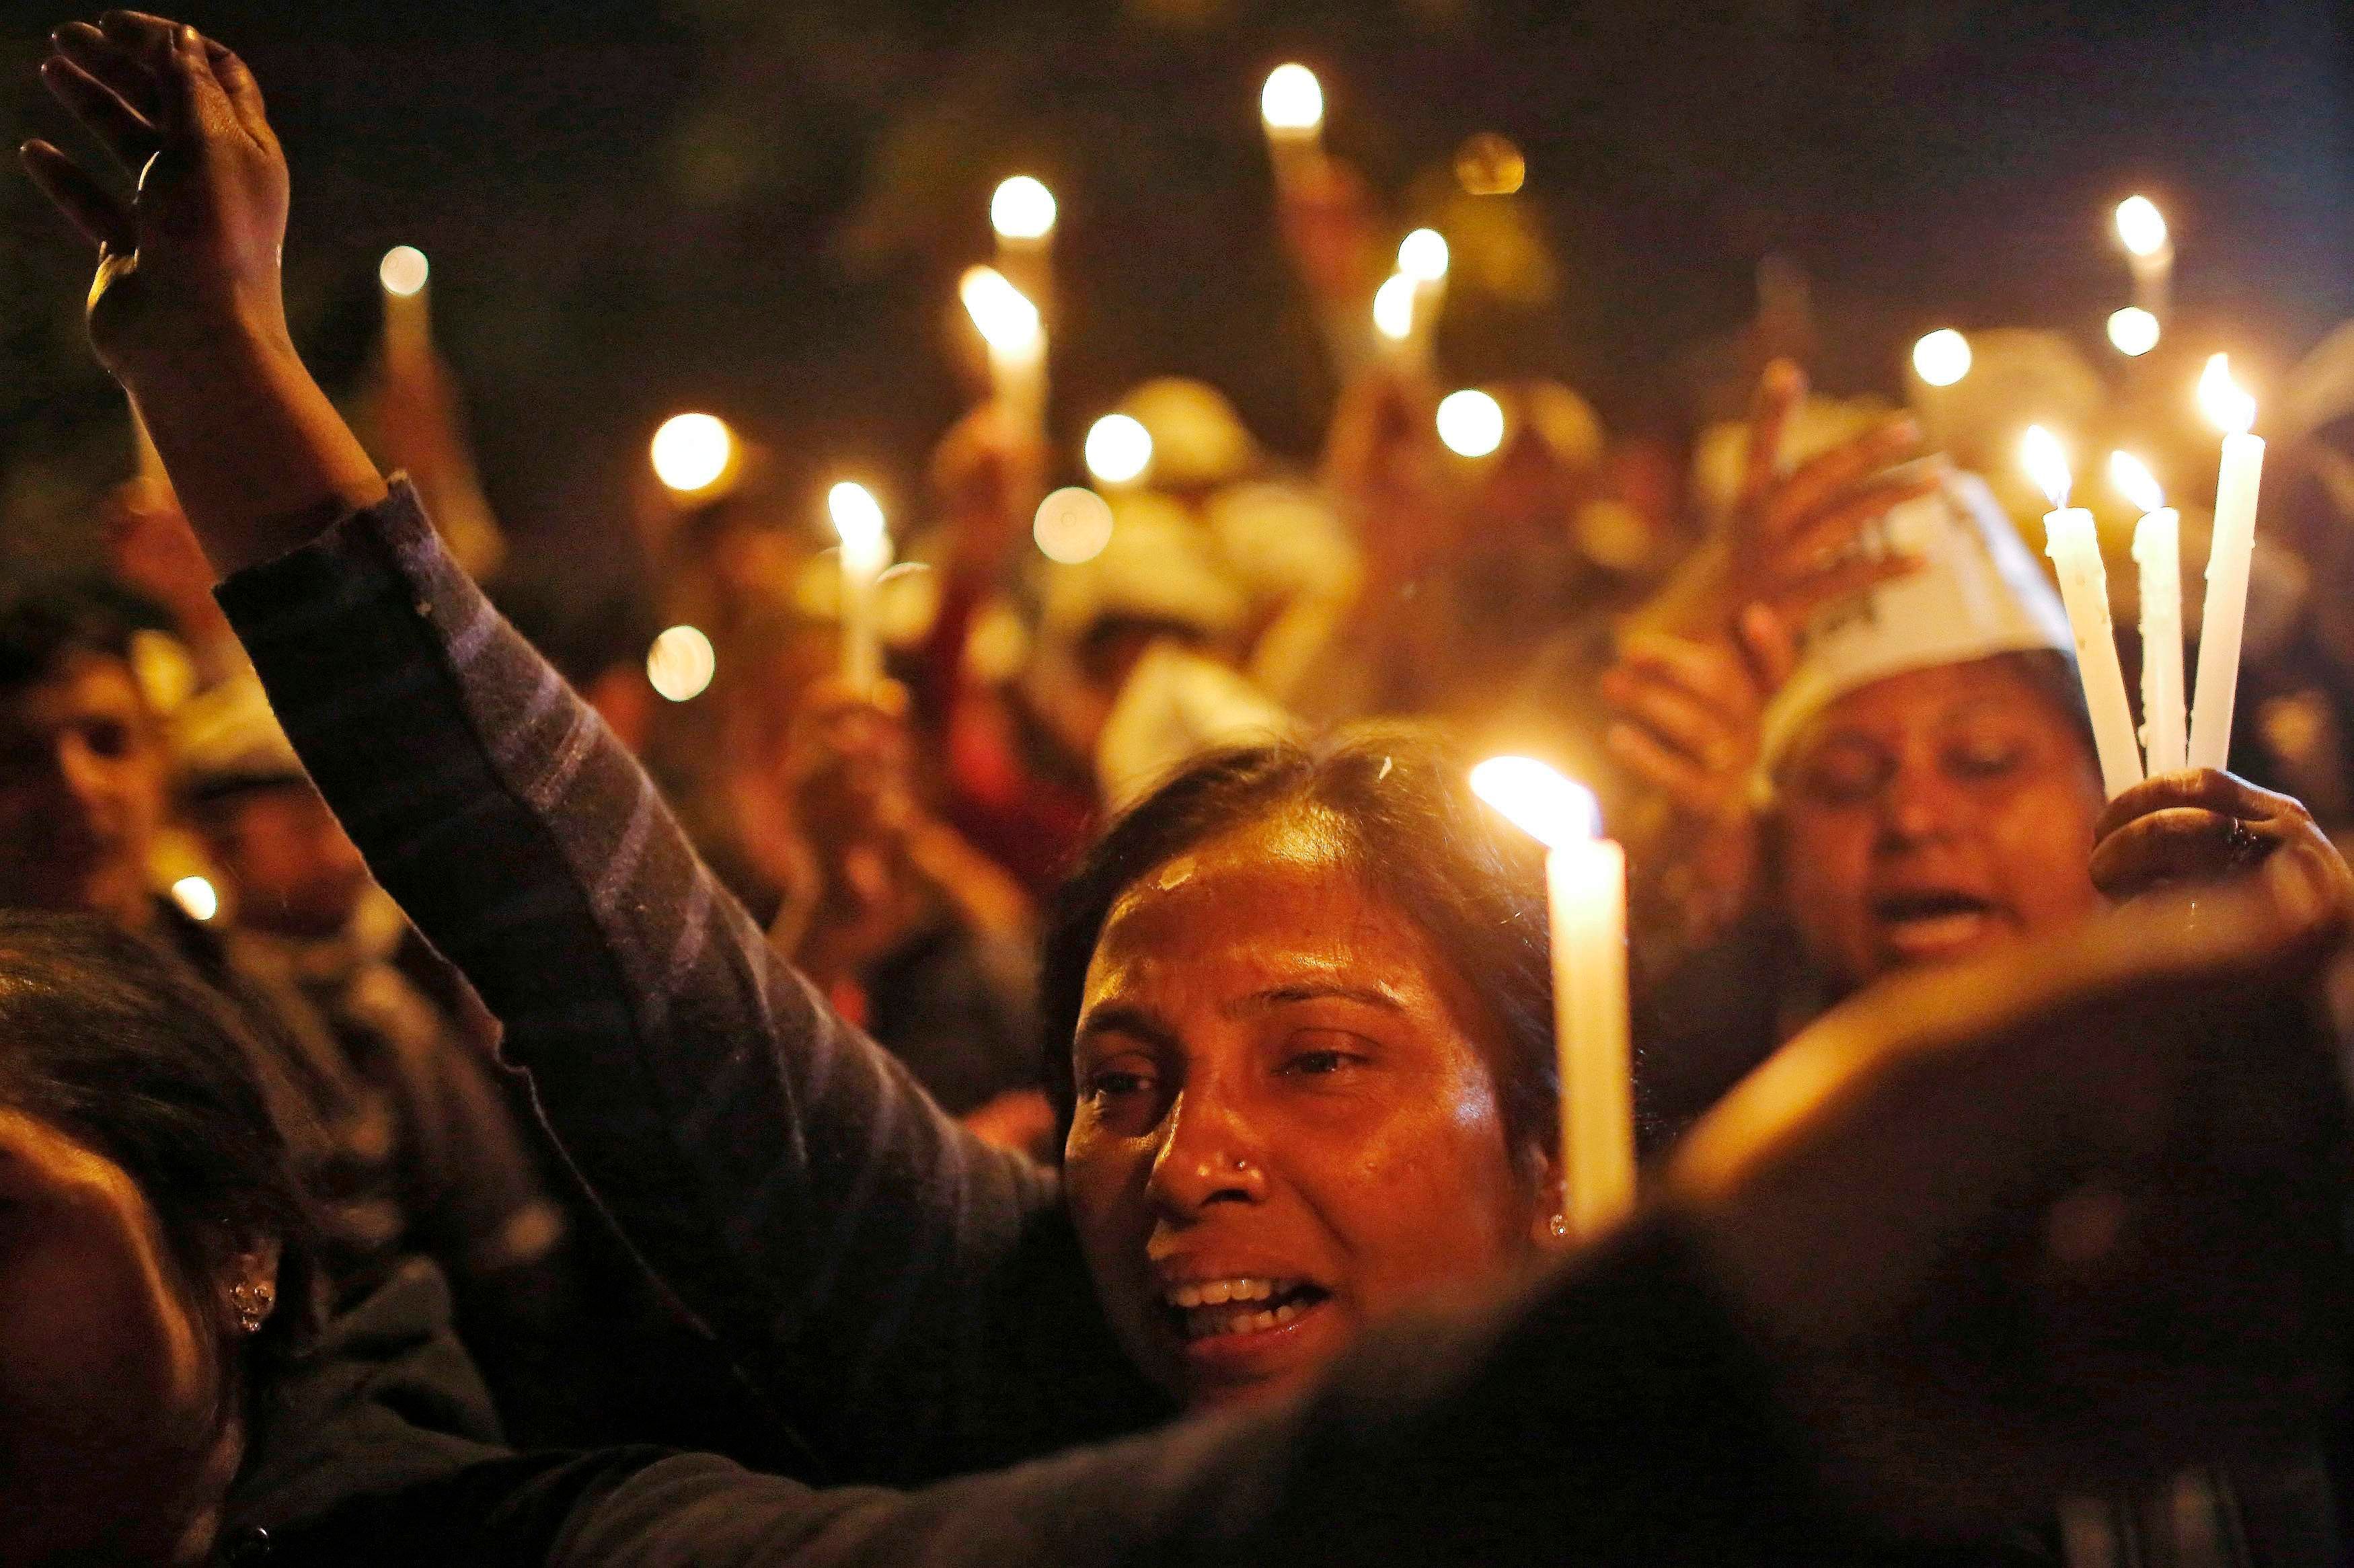 File photo showing supporters of Aam Aadmi (Common Man) Party (AAP) shout slogans as they participate in a candle light vigil during a protest against the rape of a female passenger, in New Delhi December 8, 2014. Photo: Reuters